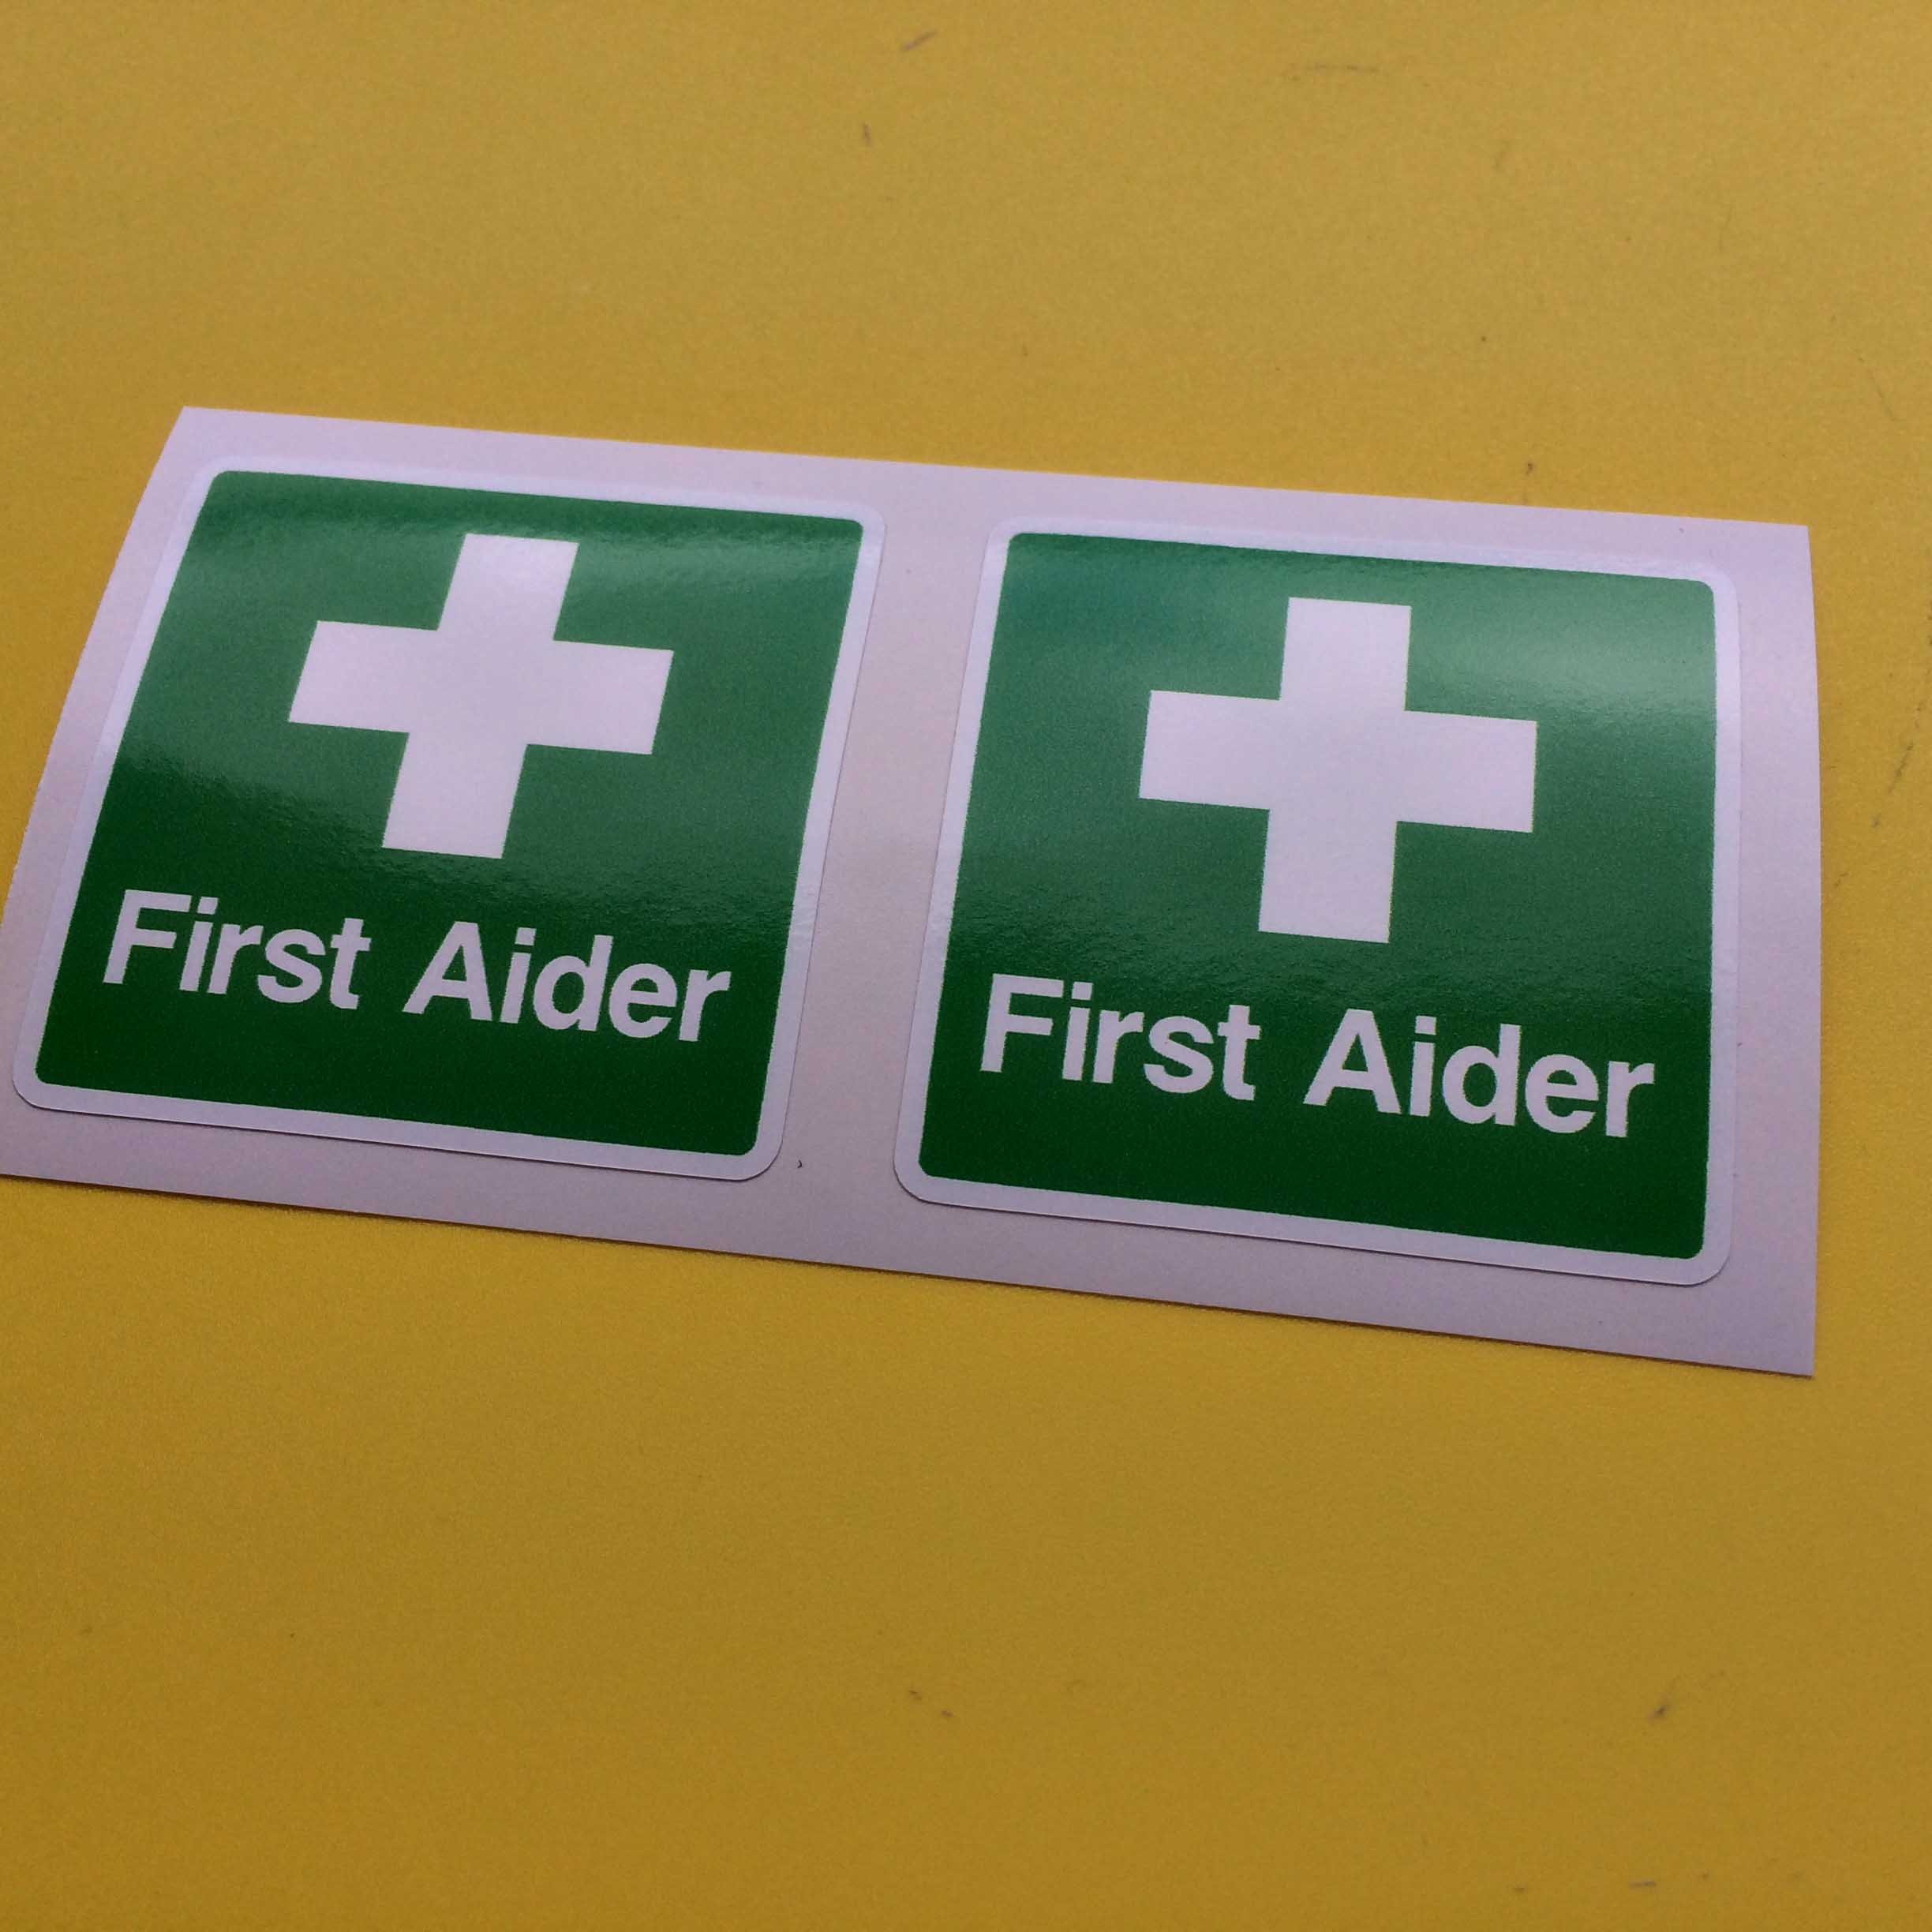 FIRST AIDER STICKERS. First Aider in white letters and a white cross on a green square.